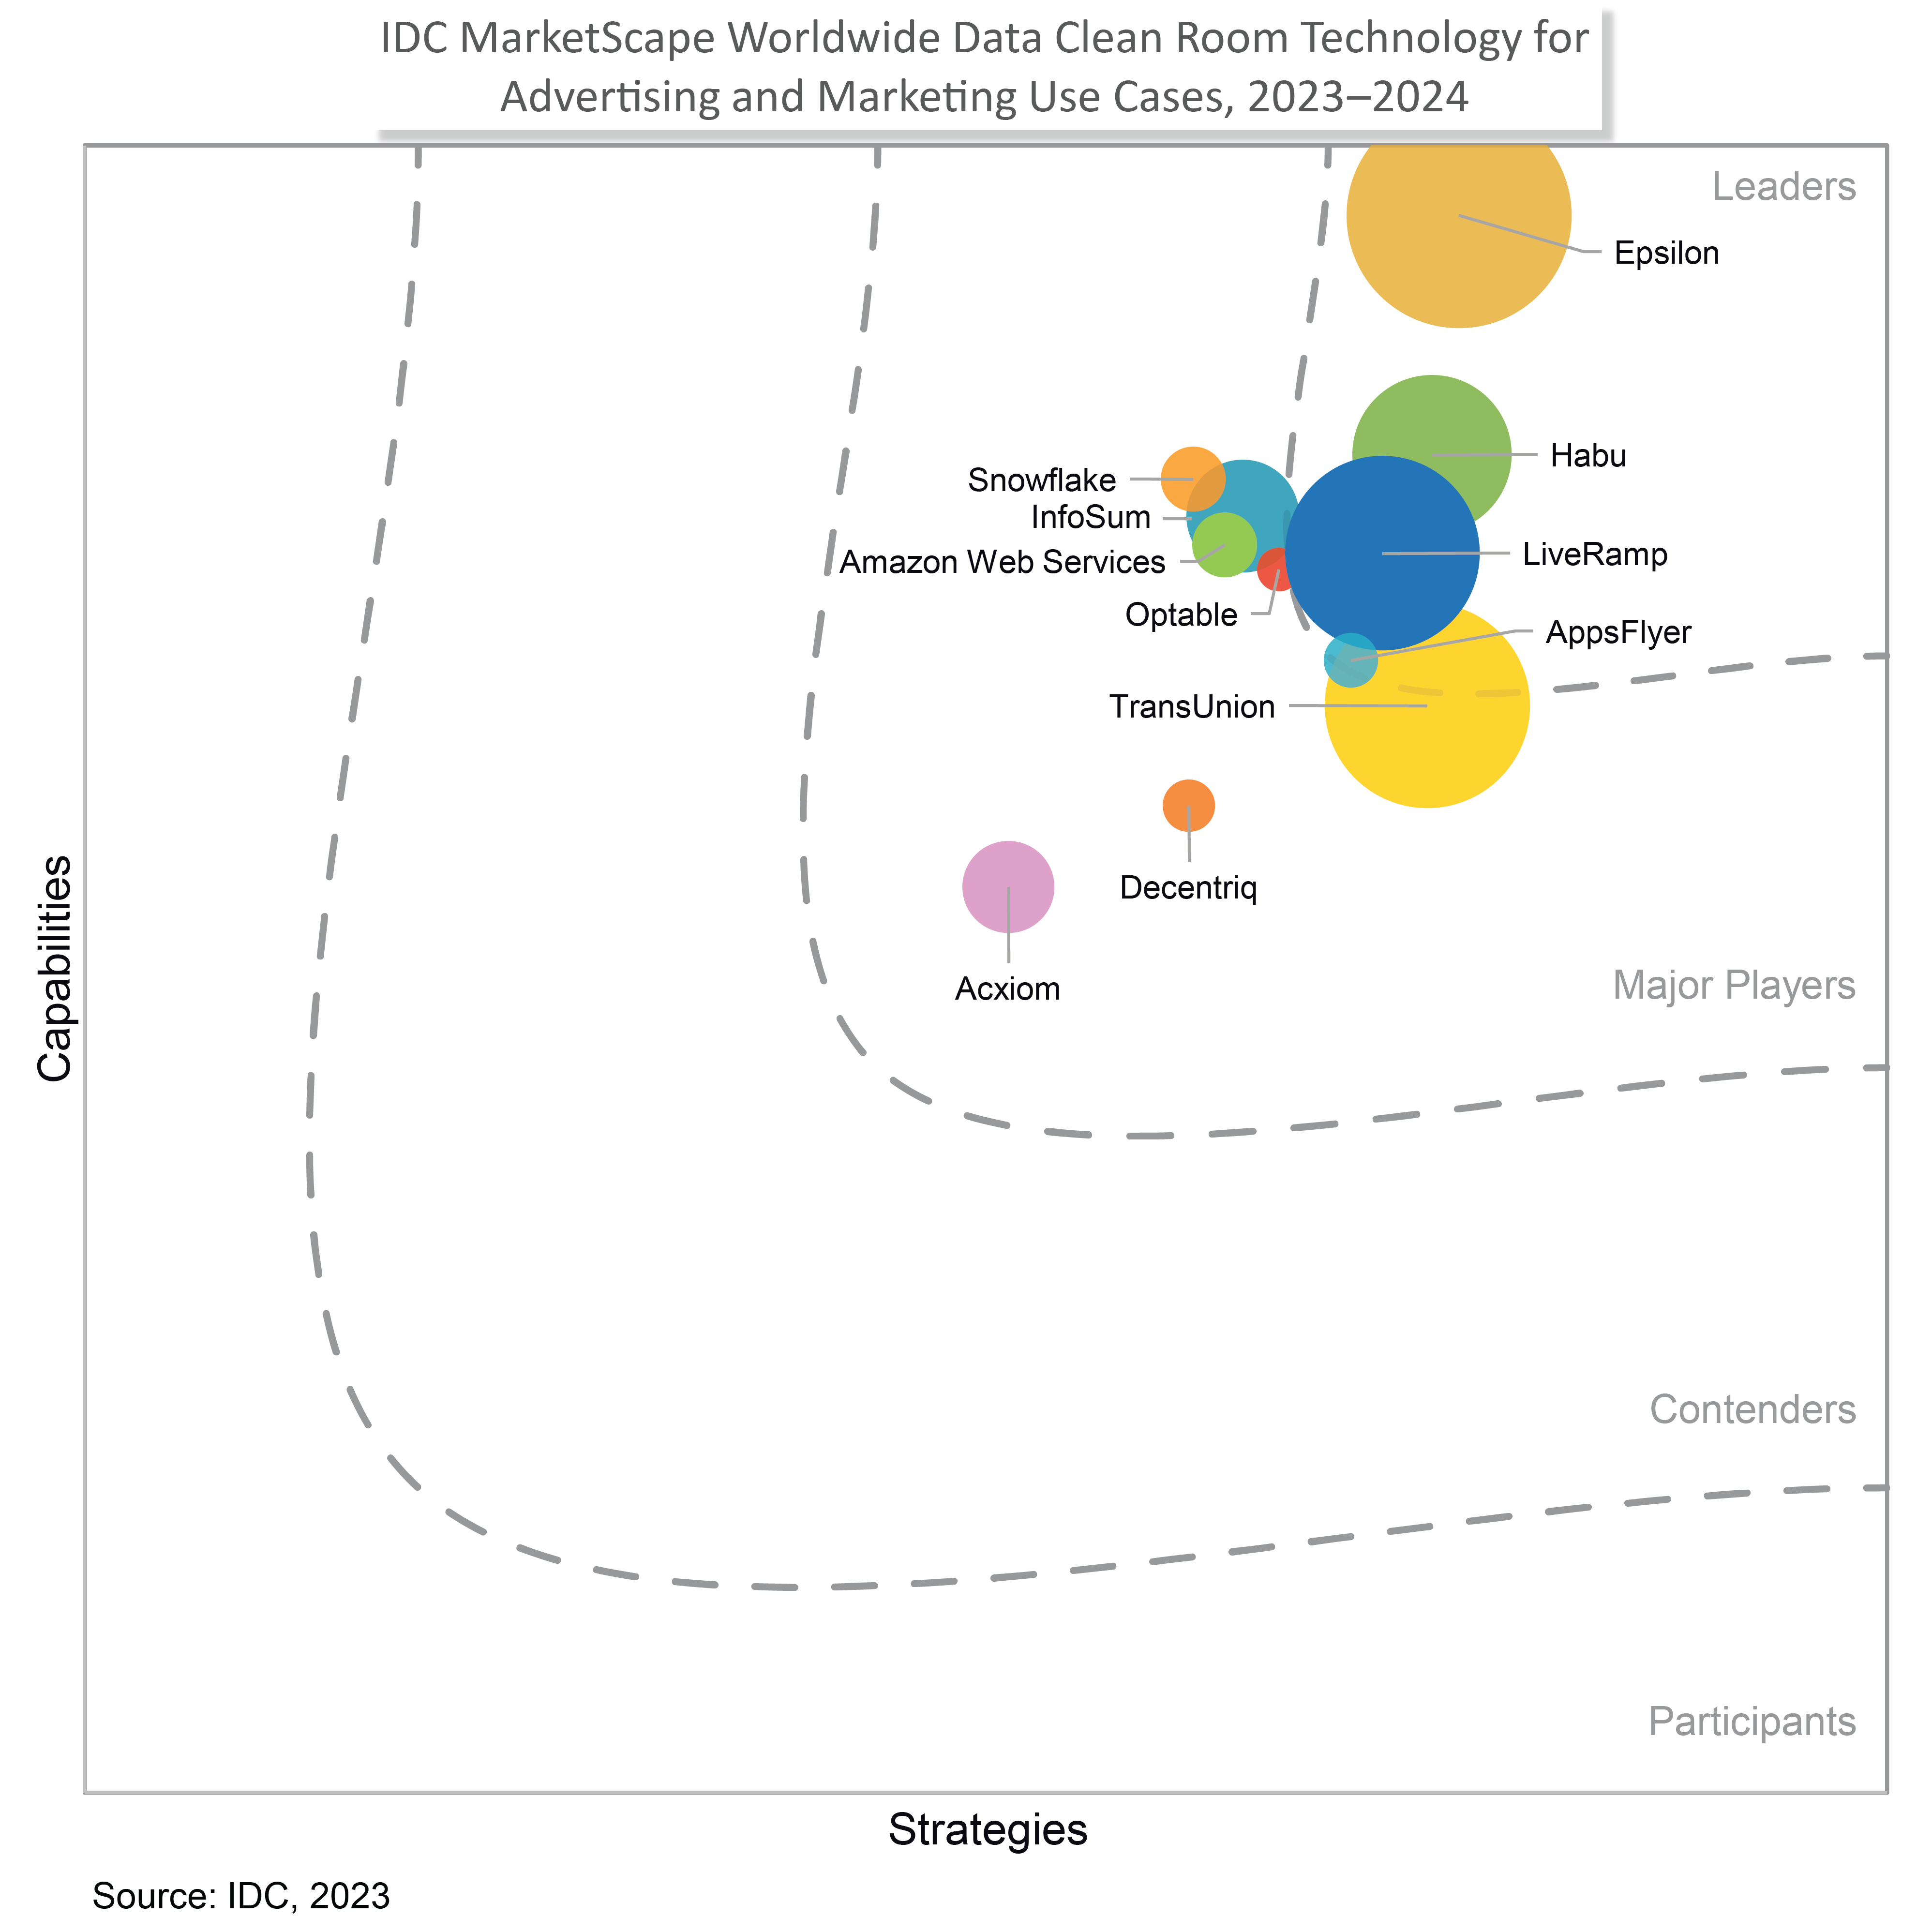 IDC MarketScape diagram Worldwide Data Clean Room Technology for Advertising and Marketing Use Cases